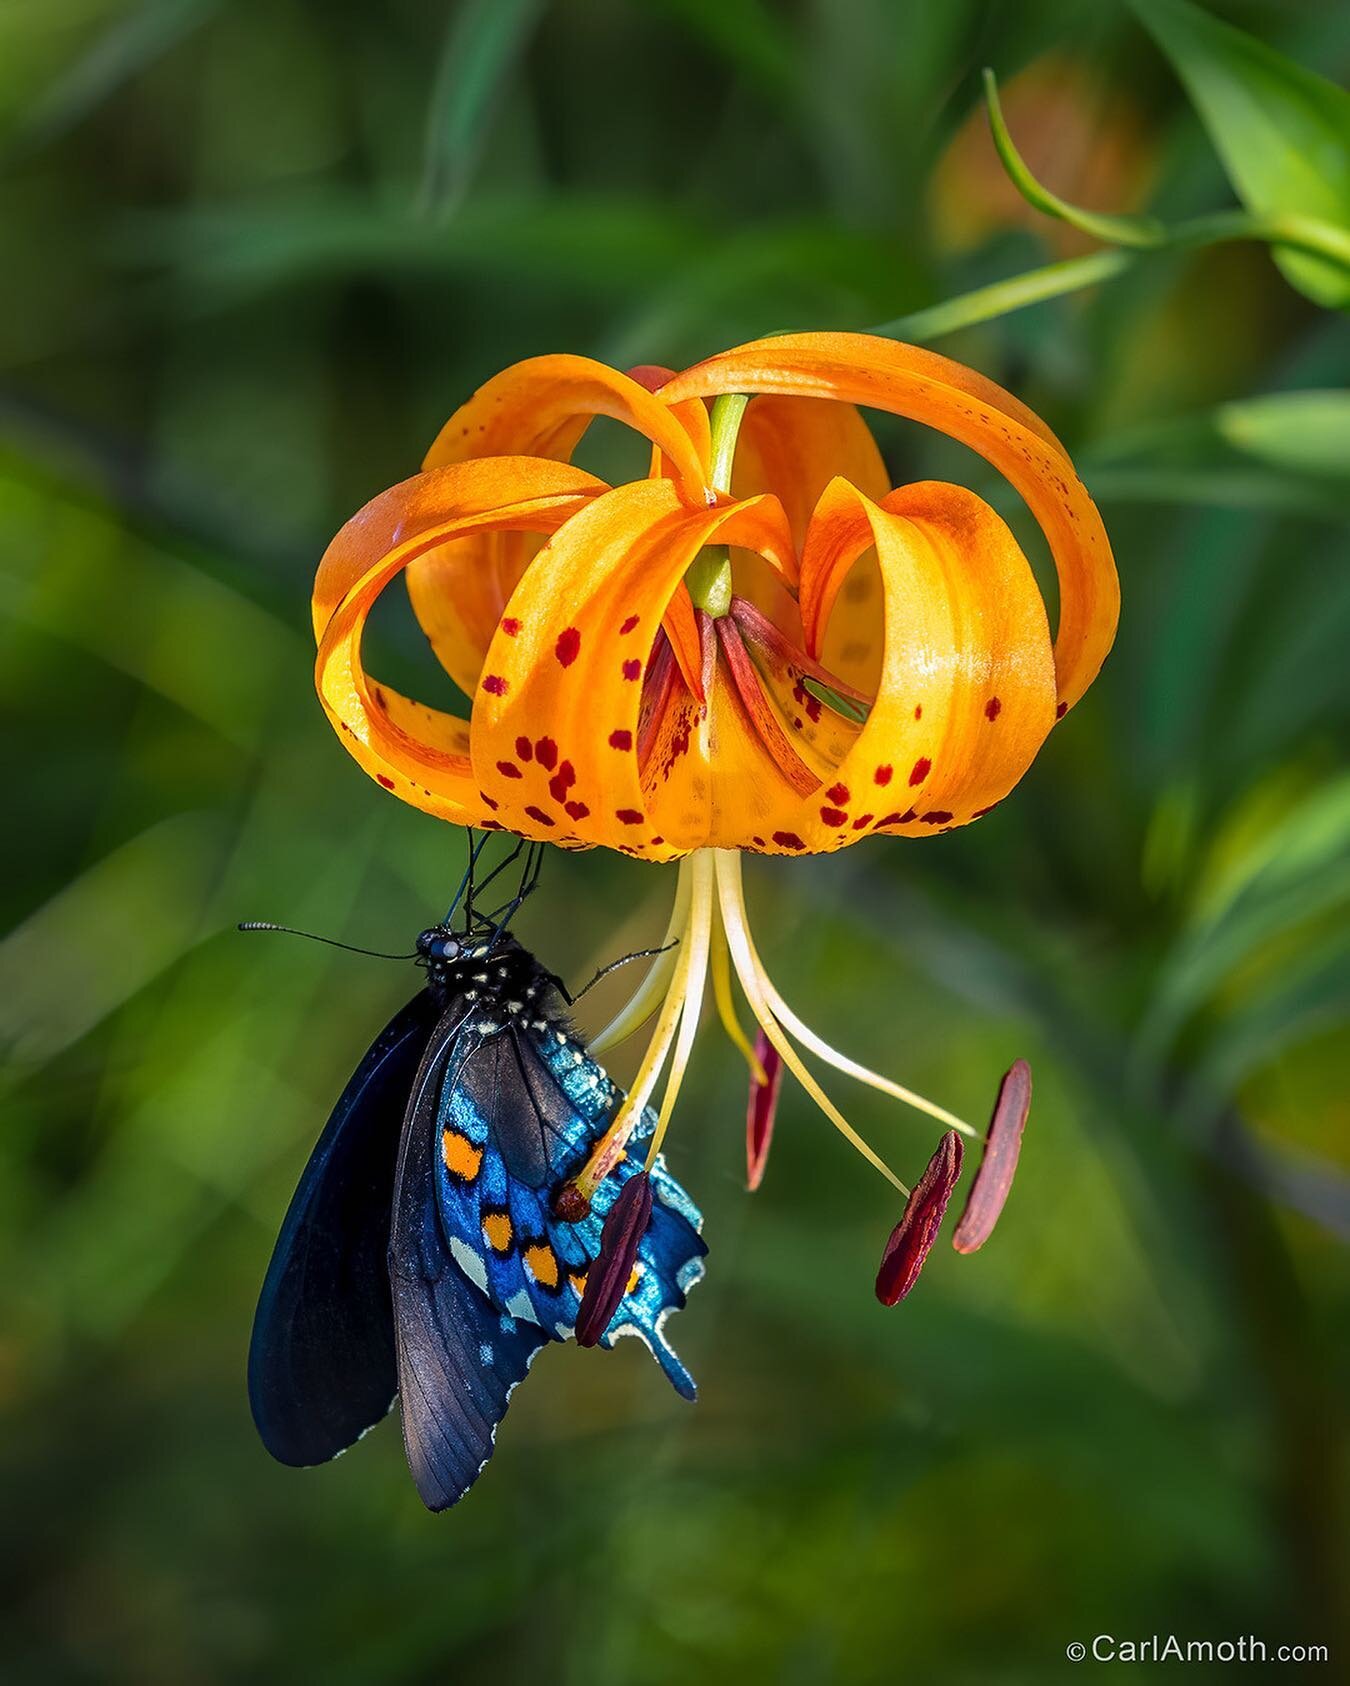 Nature's Perfection ~

Pipevine Swallowtail on a Turk's-cap Lily &mdash; photographed on my morning excursion along our mountain ridge.

#butterfly #butterflies #wildflowers #nature #naturephotography #blueridgemountains #blueridge #asheville